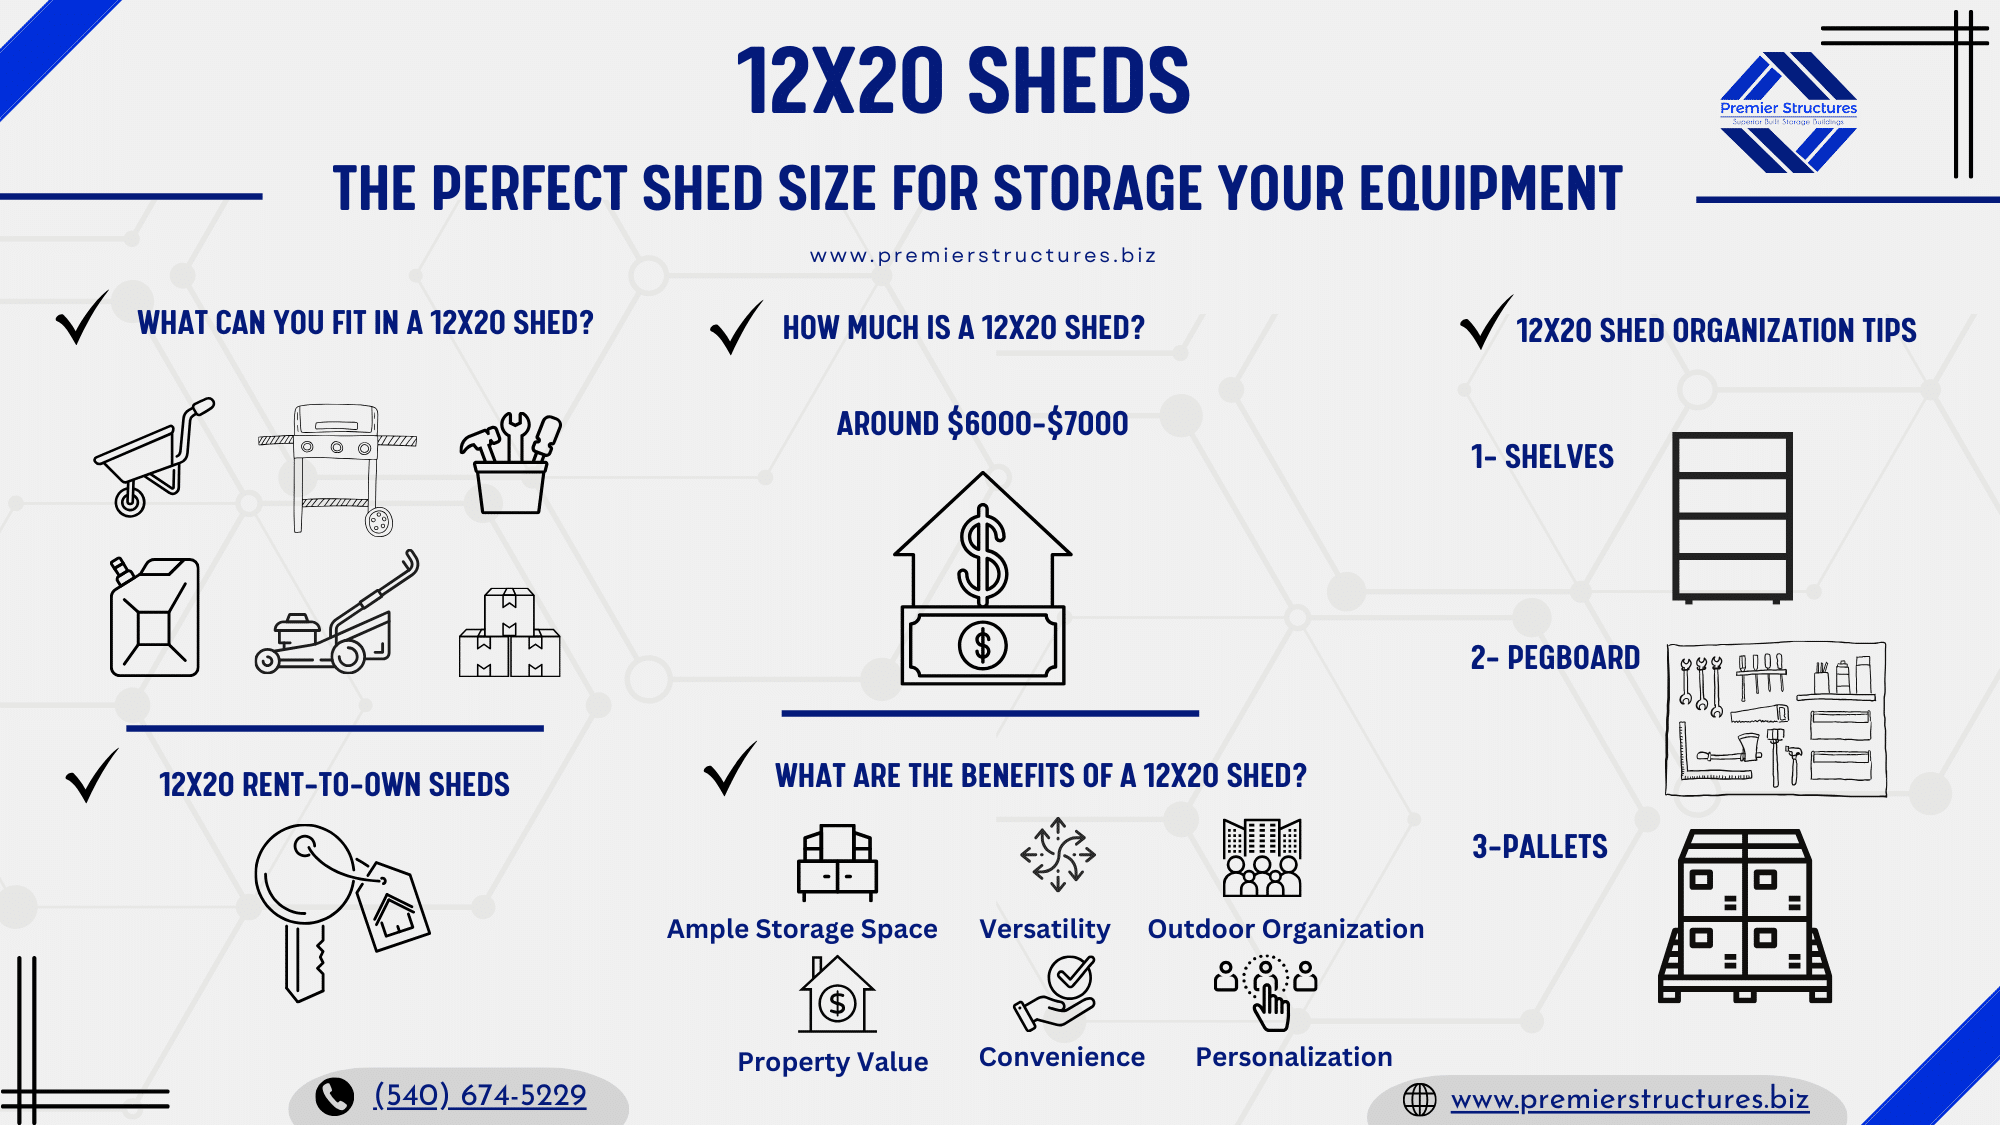 12x20 shed infographic